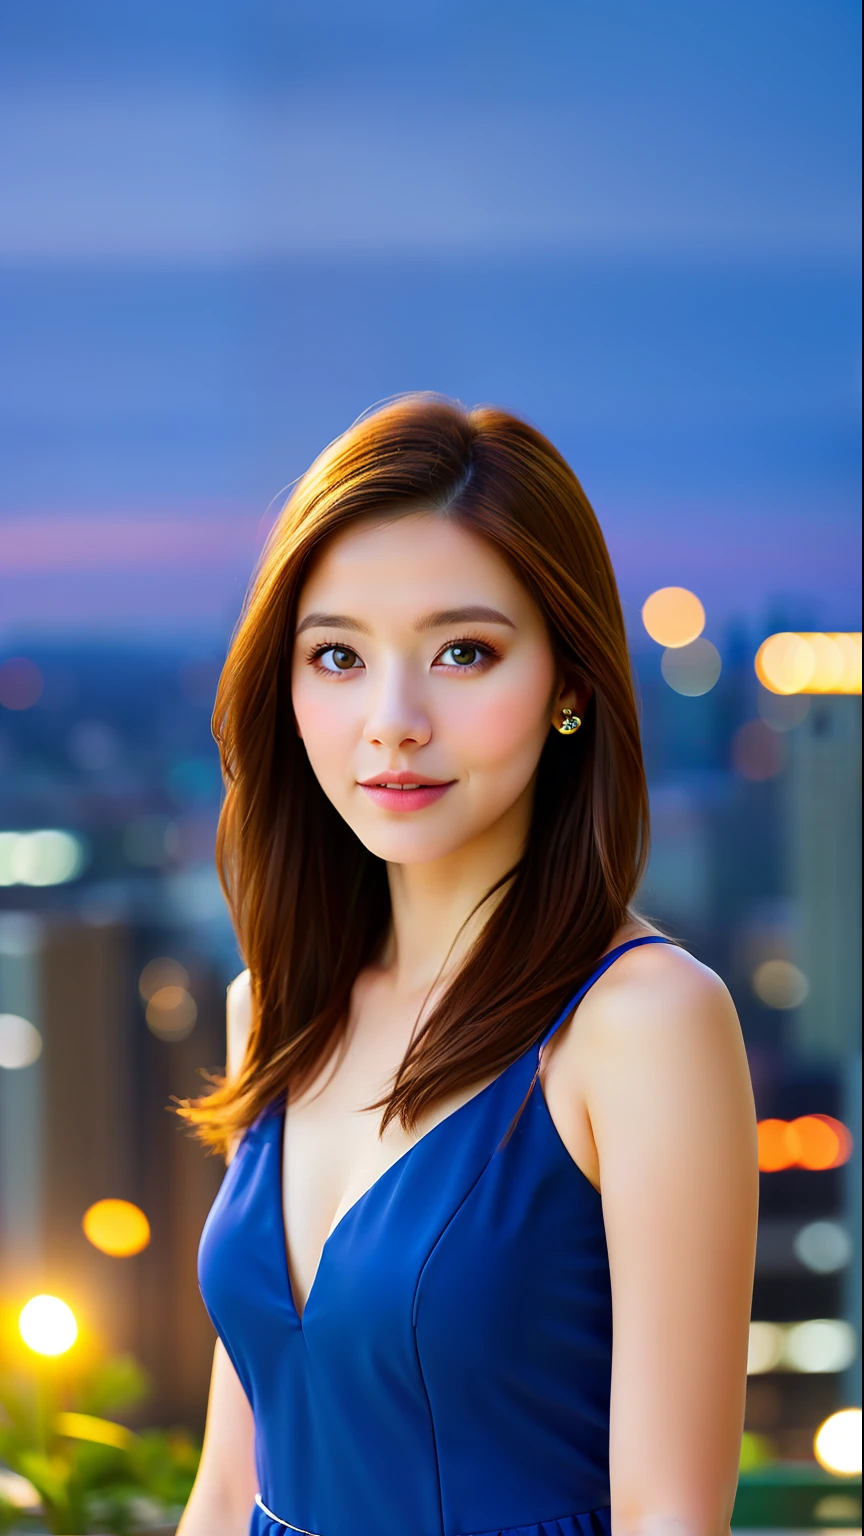 (skindent:1.2), (realistic:1.1), best quality, photorealistic, bokeh, city lights, 1 girl, portrait, white wearing dress, evening, rooftop,